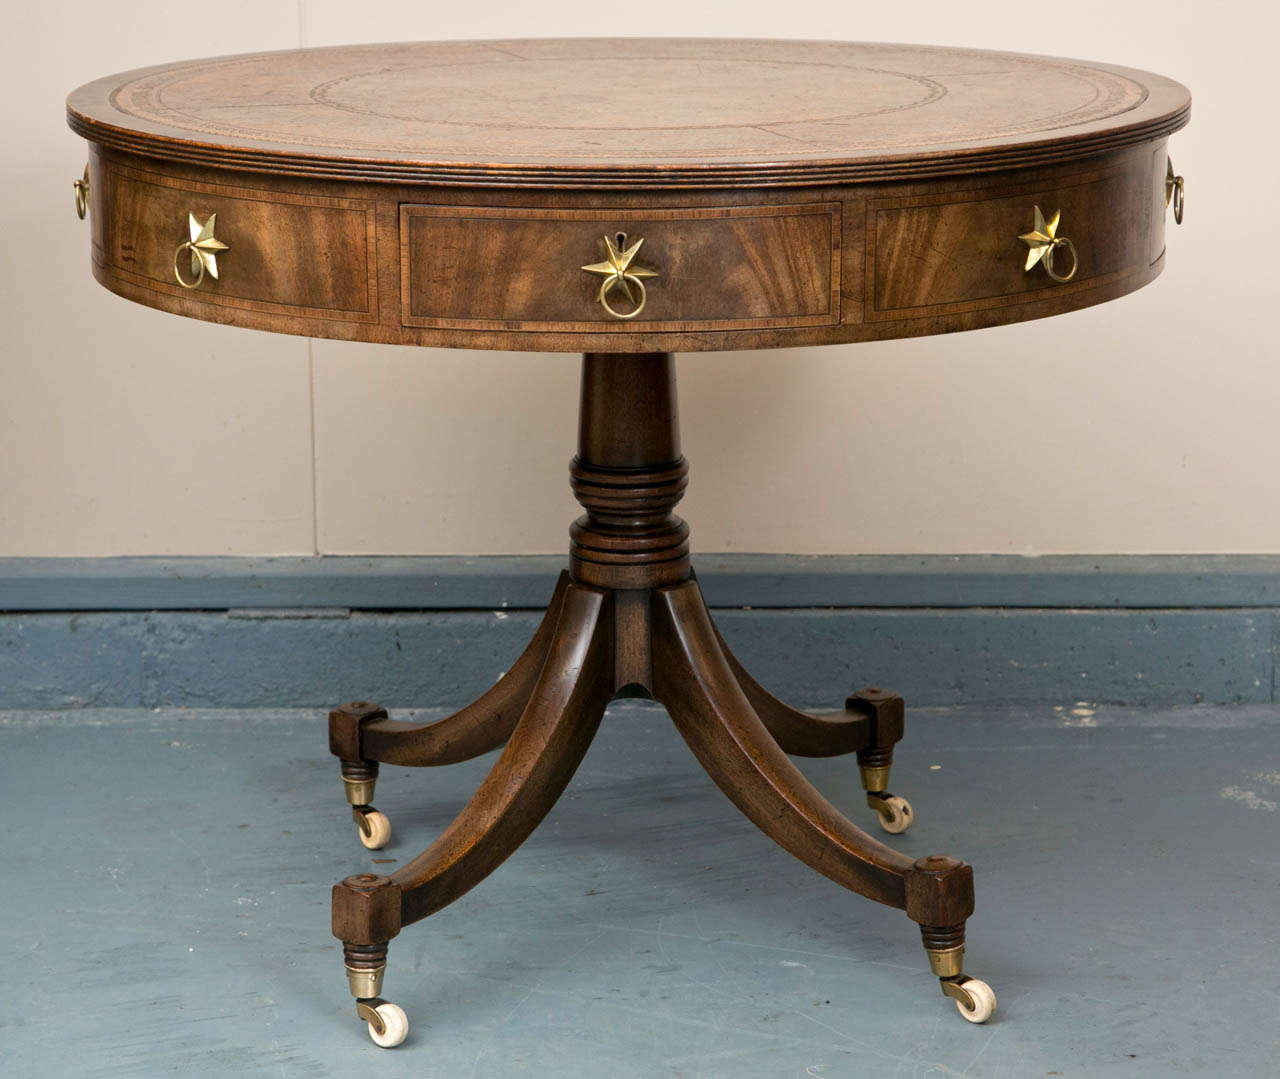 This attractive rent / drum table has wonderful proportions and shows its age beautifully. Brass ring drawer pulls with star back plates are an attractive touch that gives the table a unique look in a subtle departure from the norm. The leather top